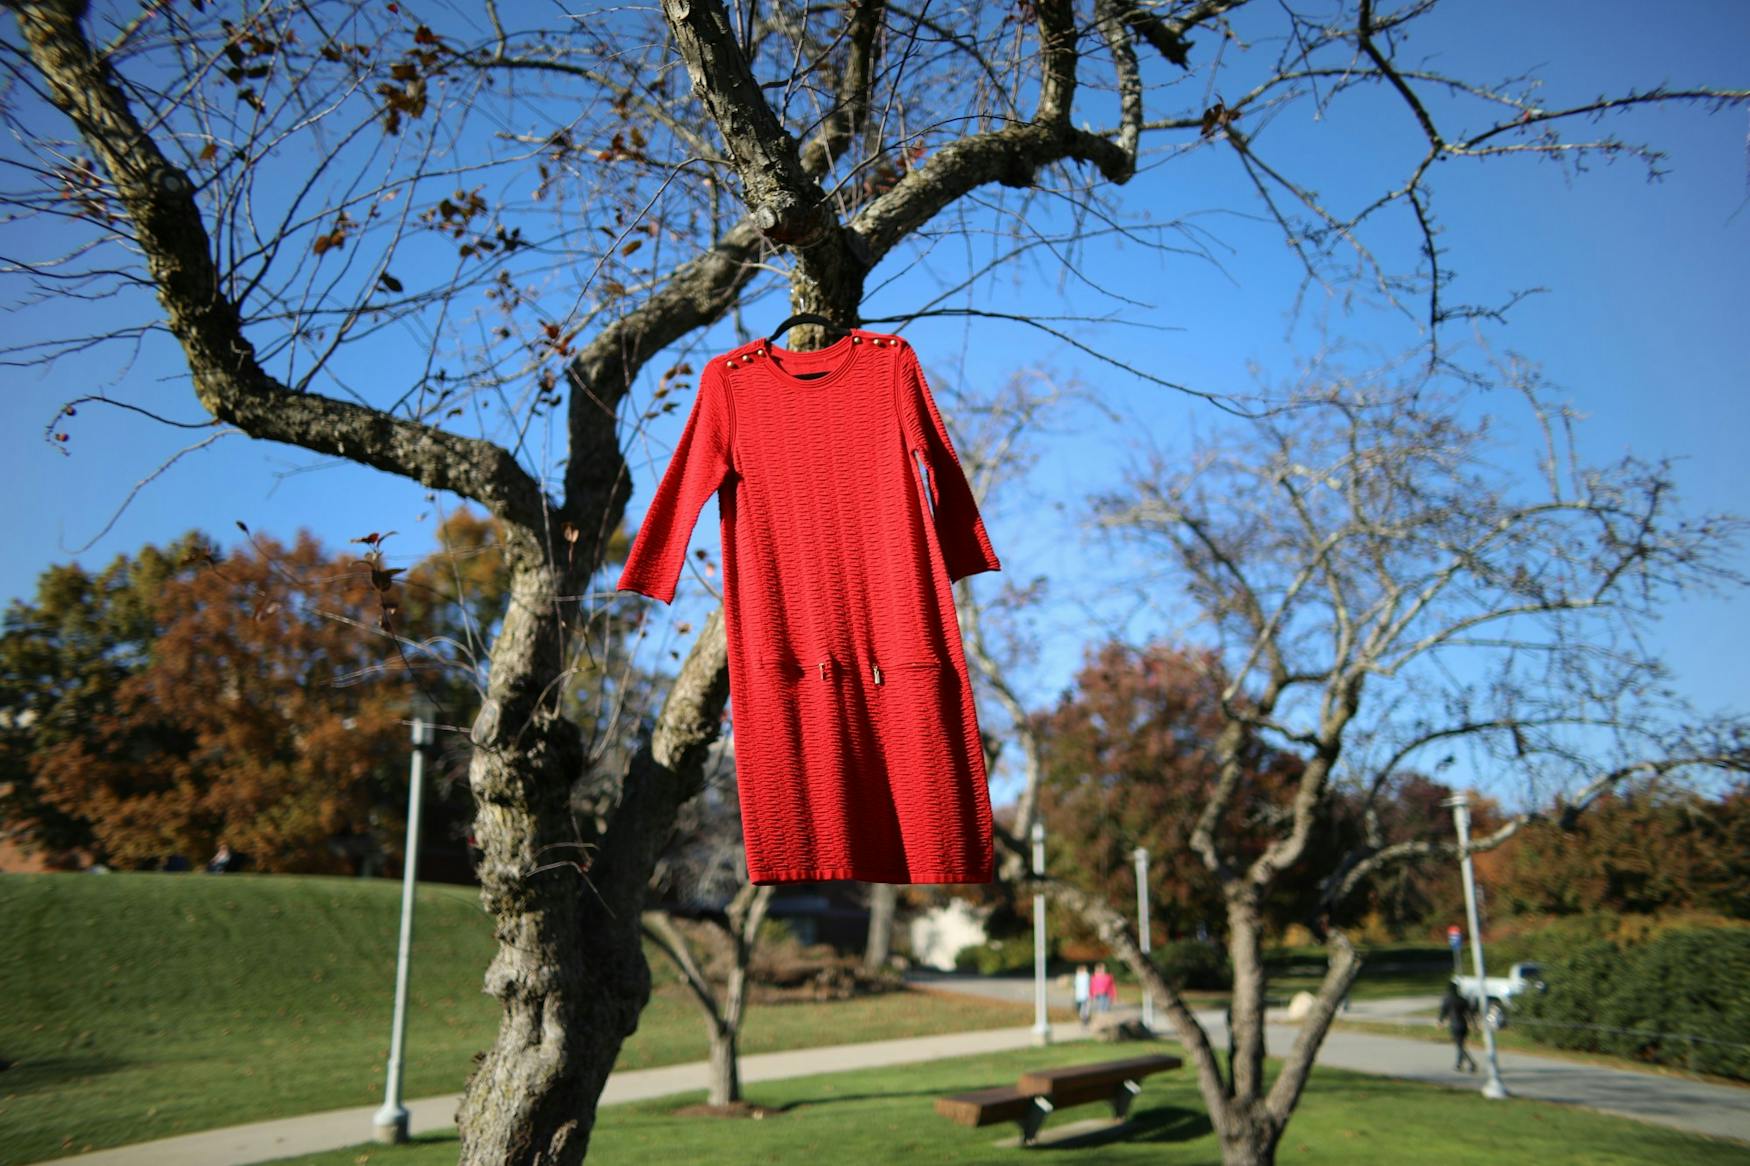 A red dress hangs from a tree on campus as part of the "REDress Project" by Indigenous artist Jaime Black. Students in the Creativity, the Arts and Social Transformation Program worked with Black to curate a campus "REDress" instillation.